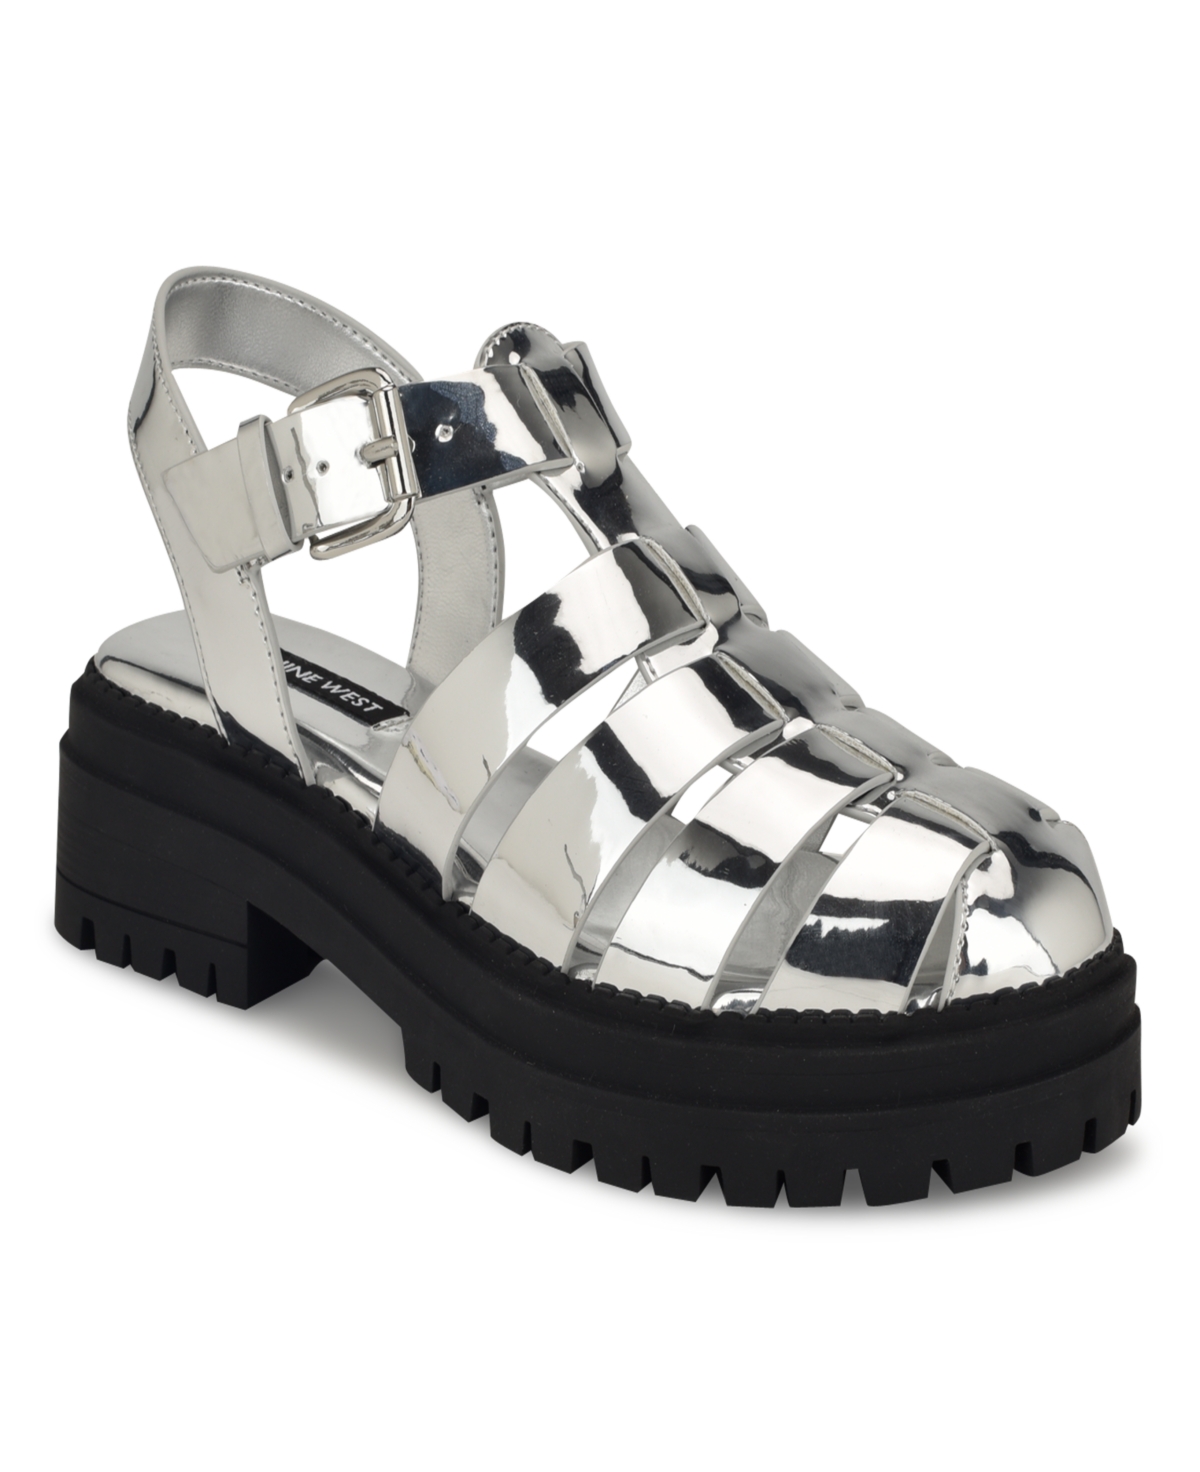 Nine West Women's Anybel Round Toe Lug Sole Casual Sandals In Silver Mirror Metallic - Manmade